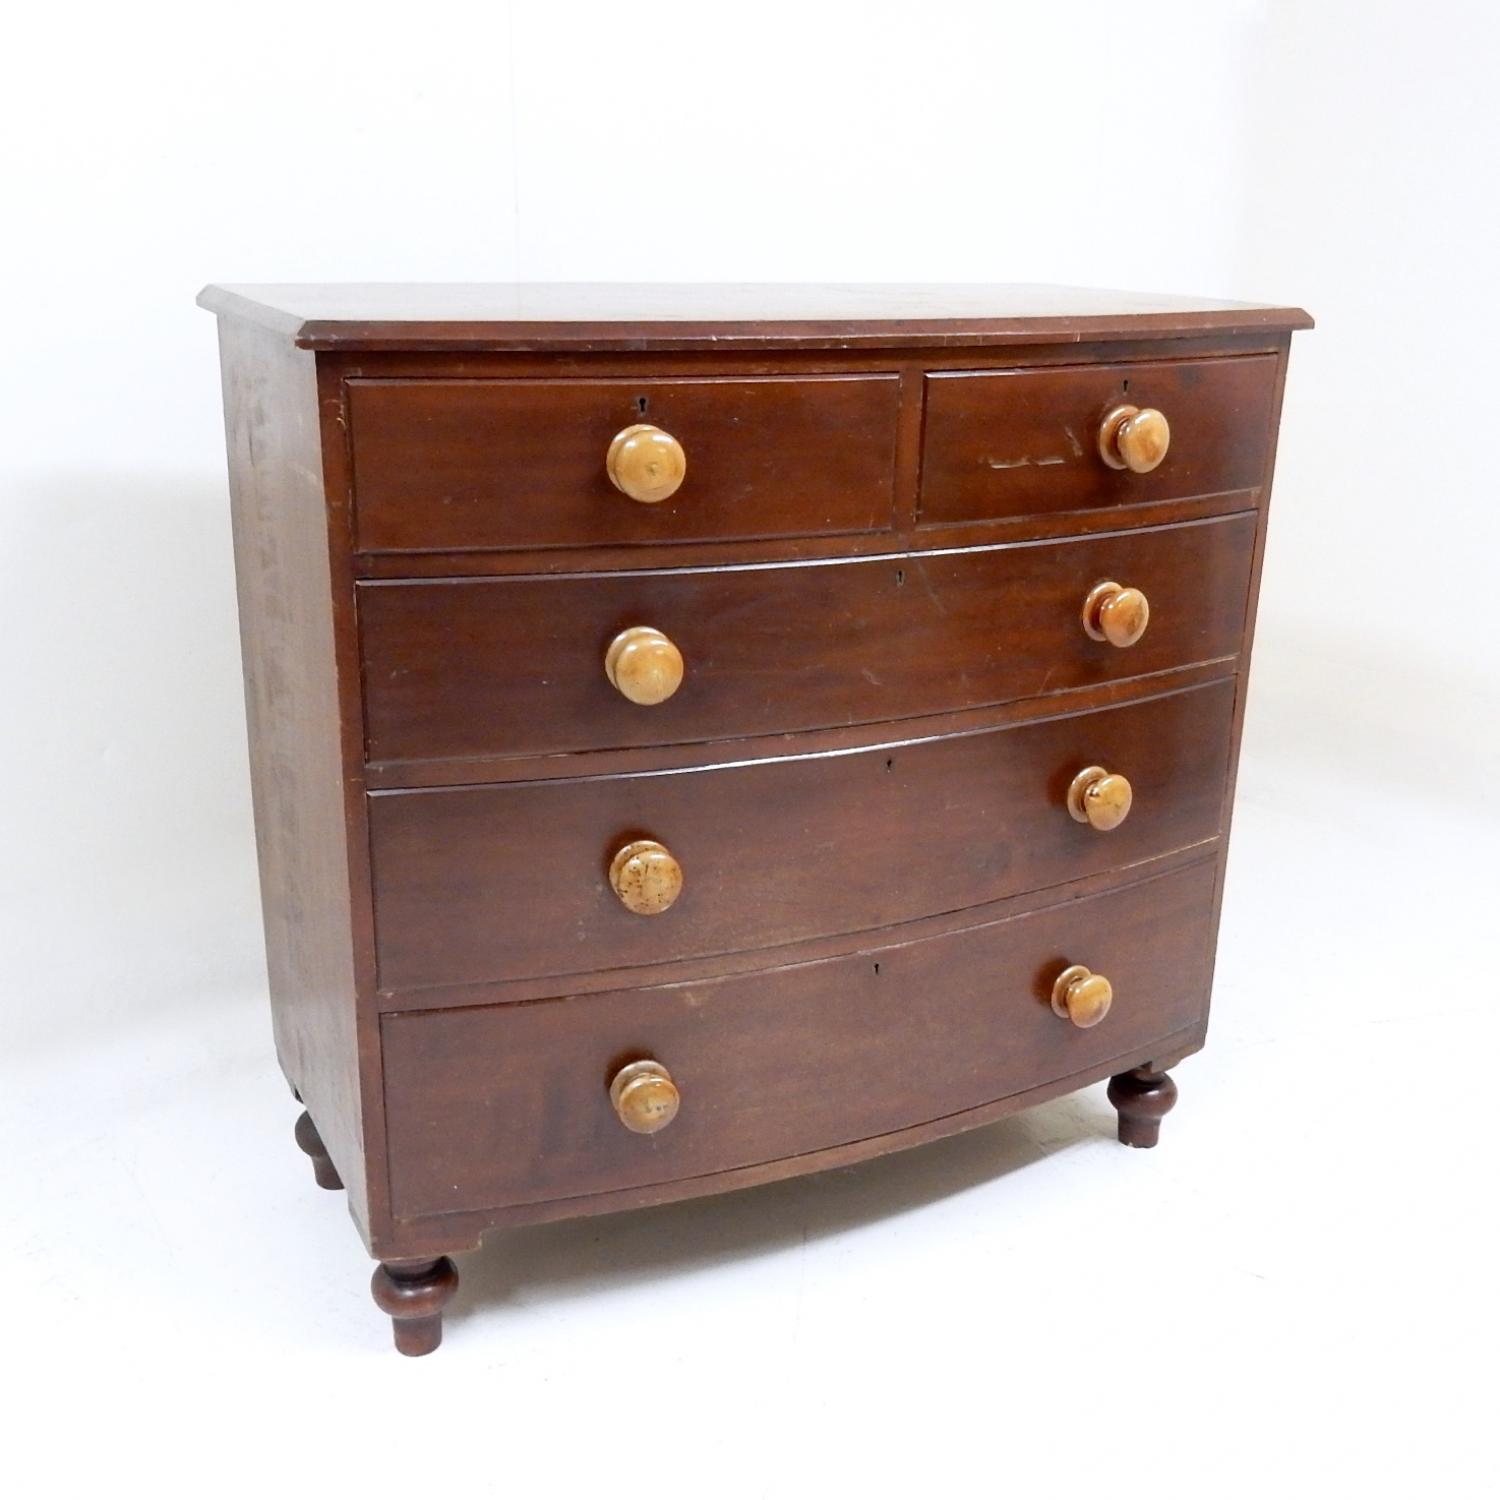 Bow-fronted Pine Chest of Drawers